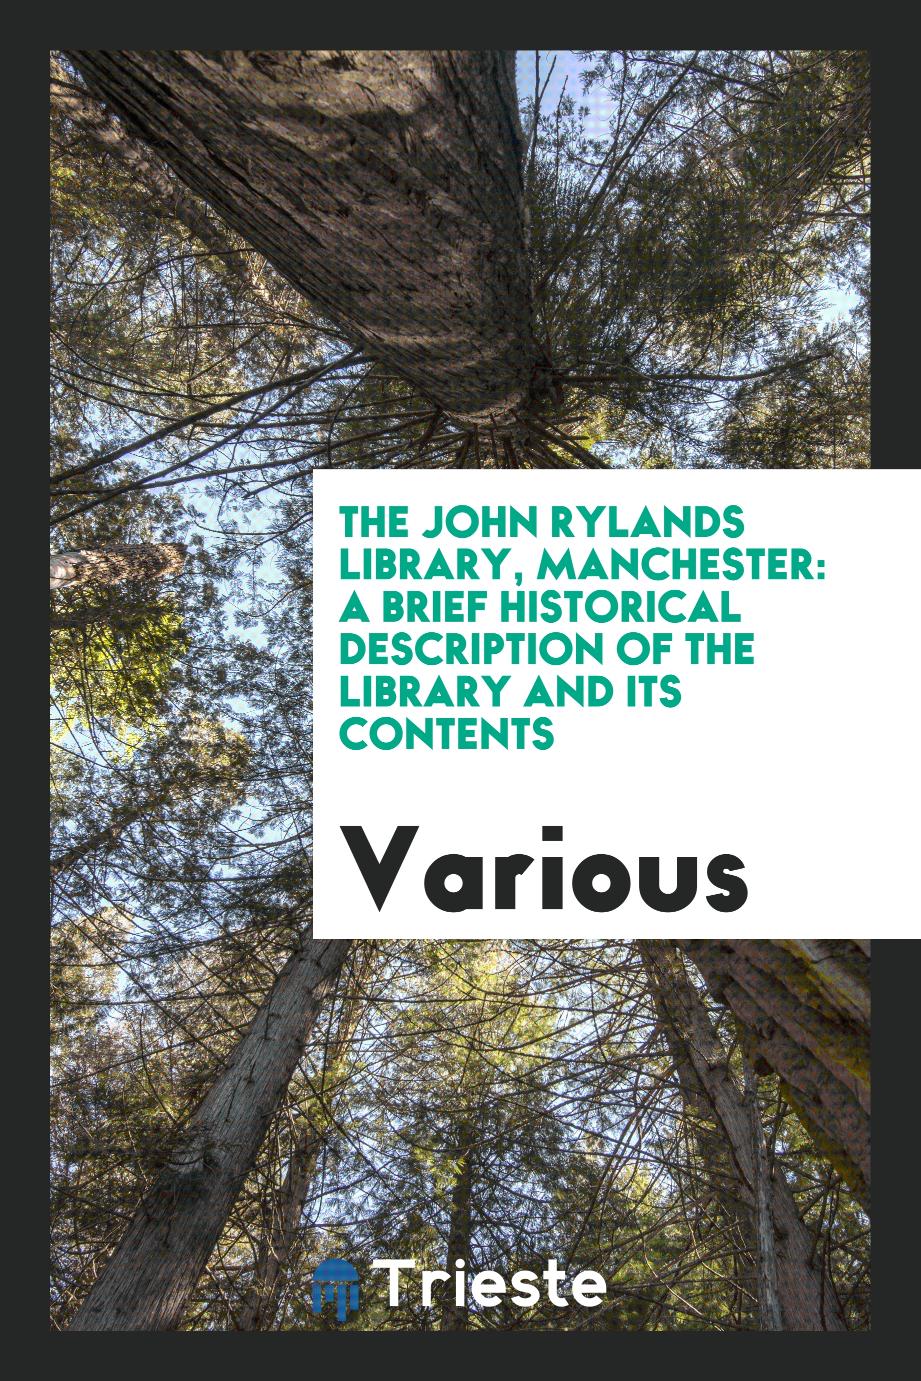 The John Rylands Library, Manchester: A Brief Historical Description of the Library and Its Contents